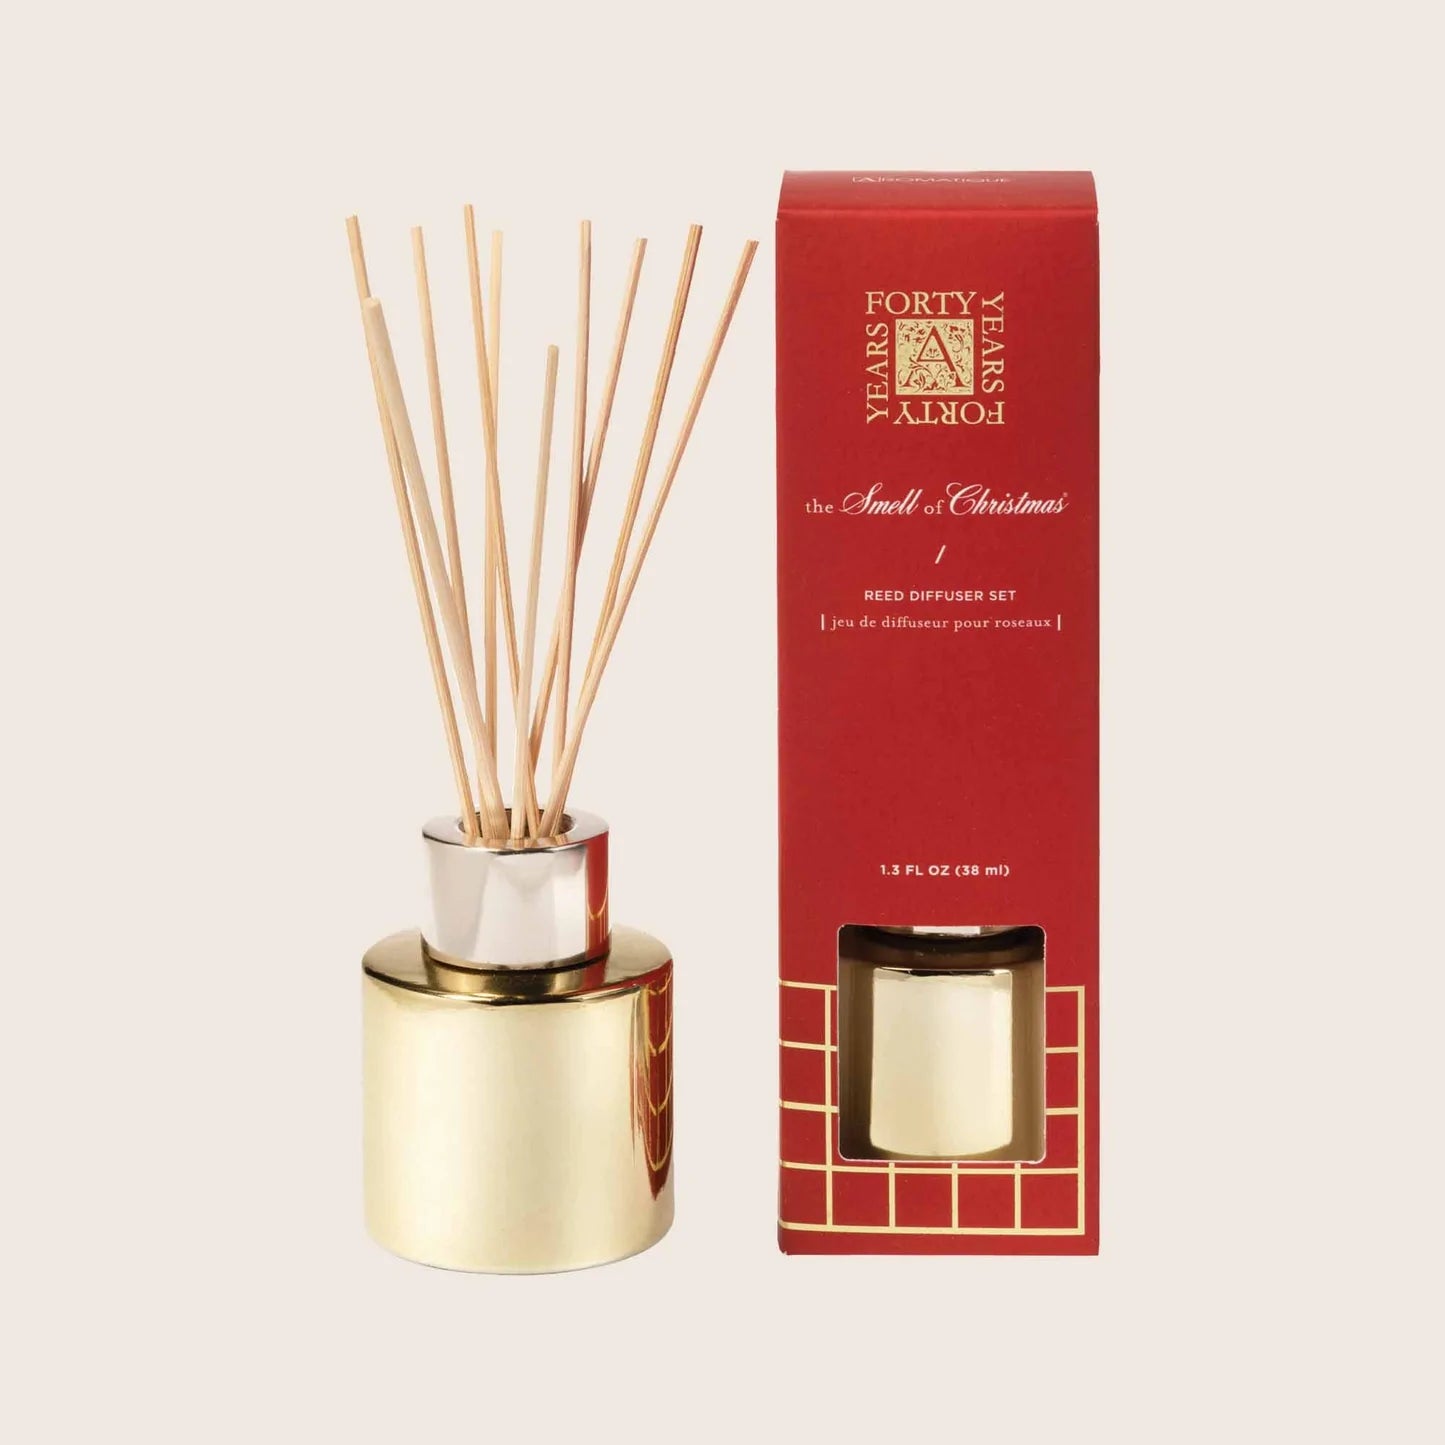 Smell of Christmas Diffuser Set